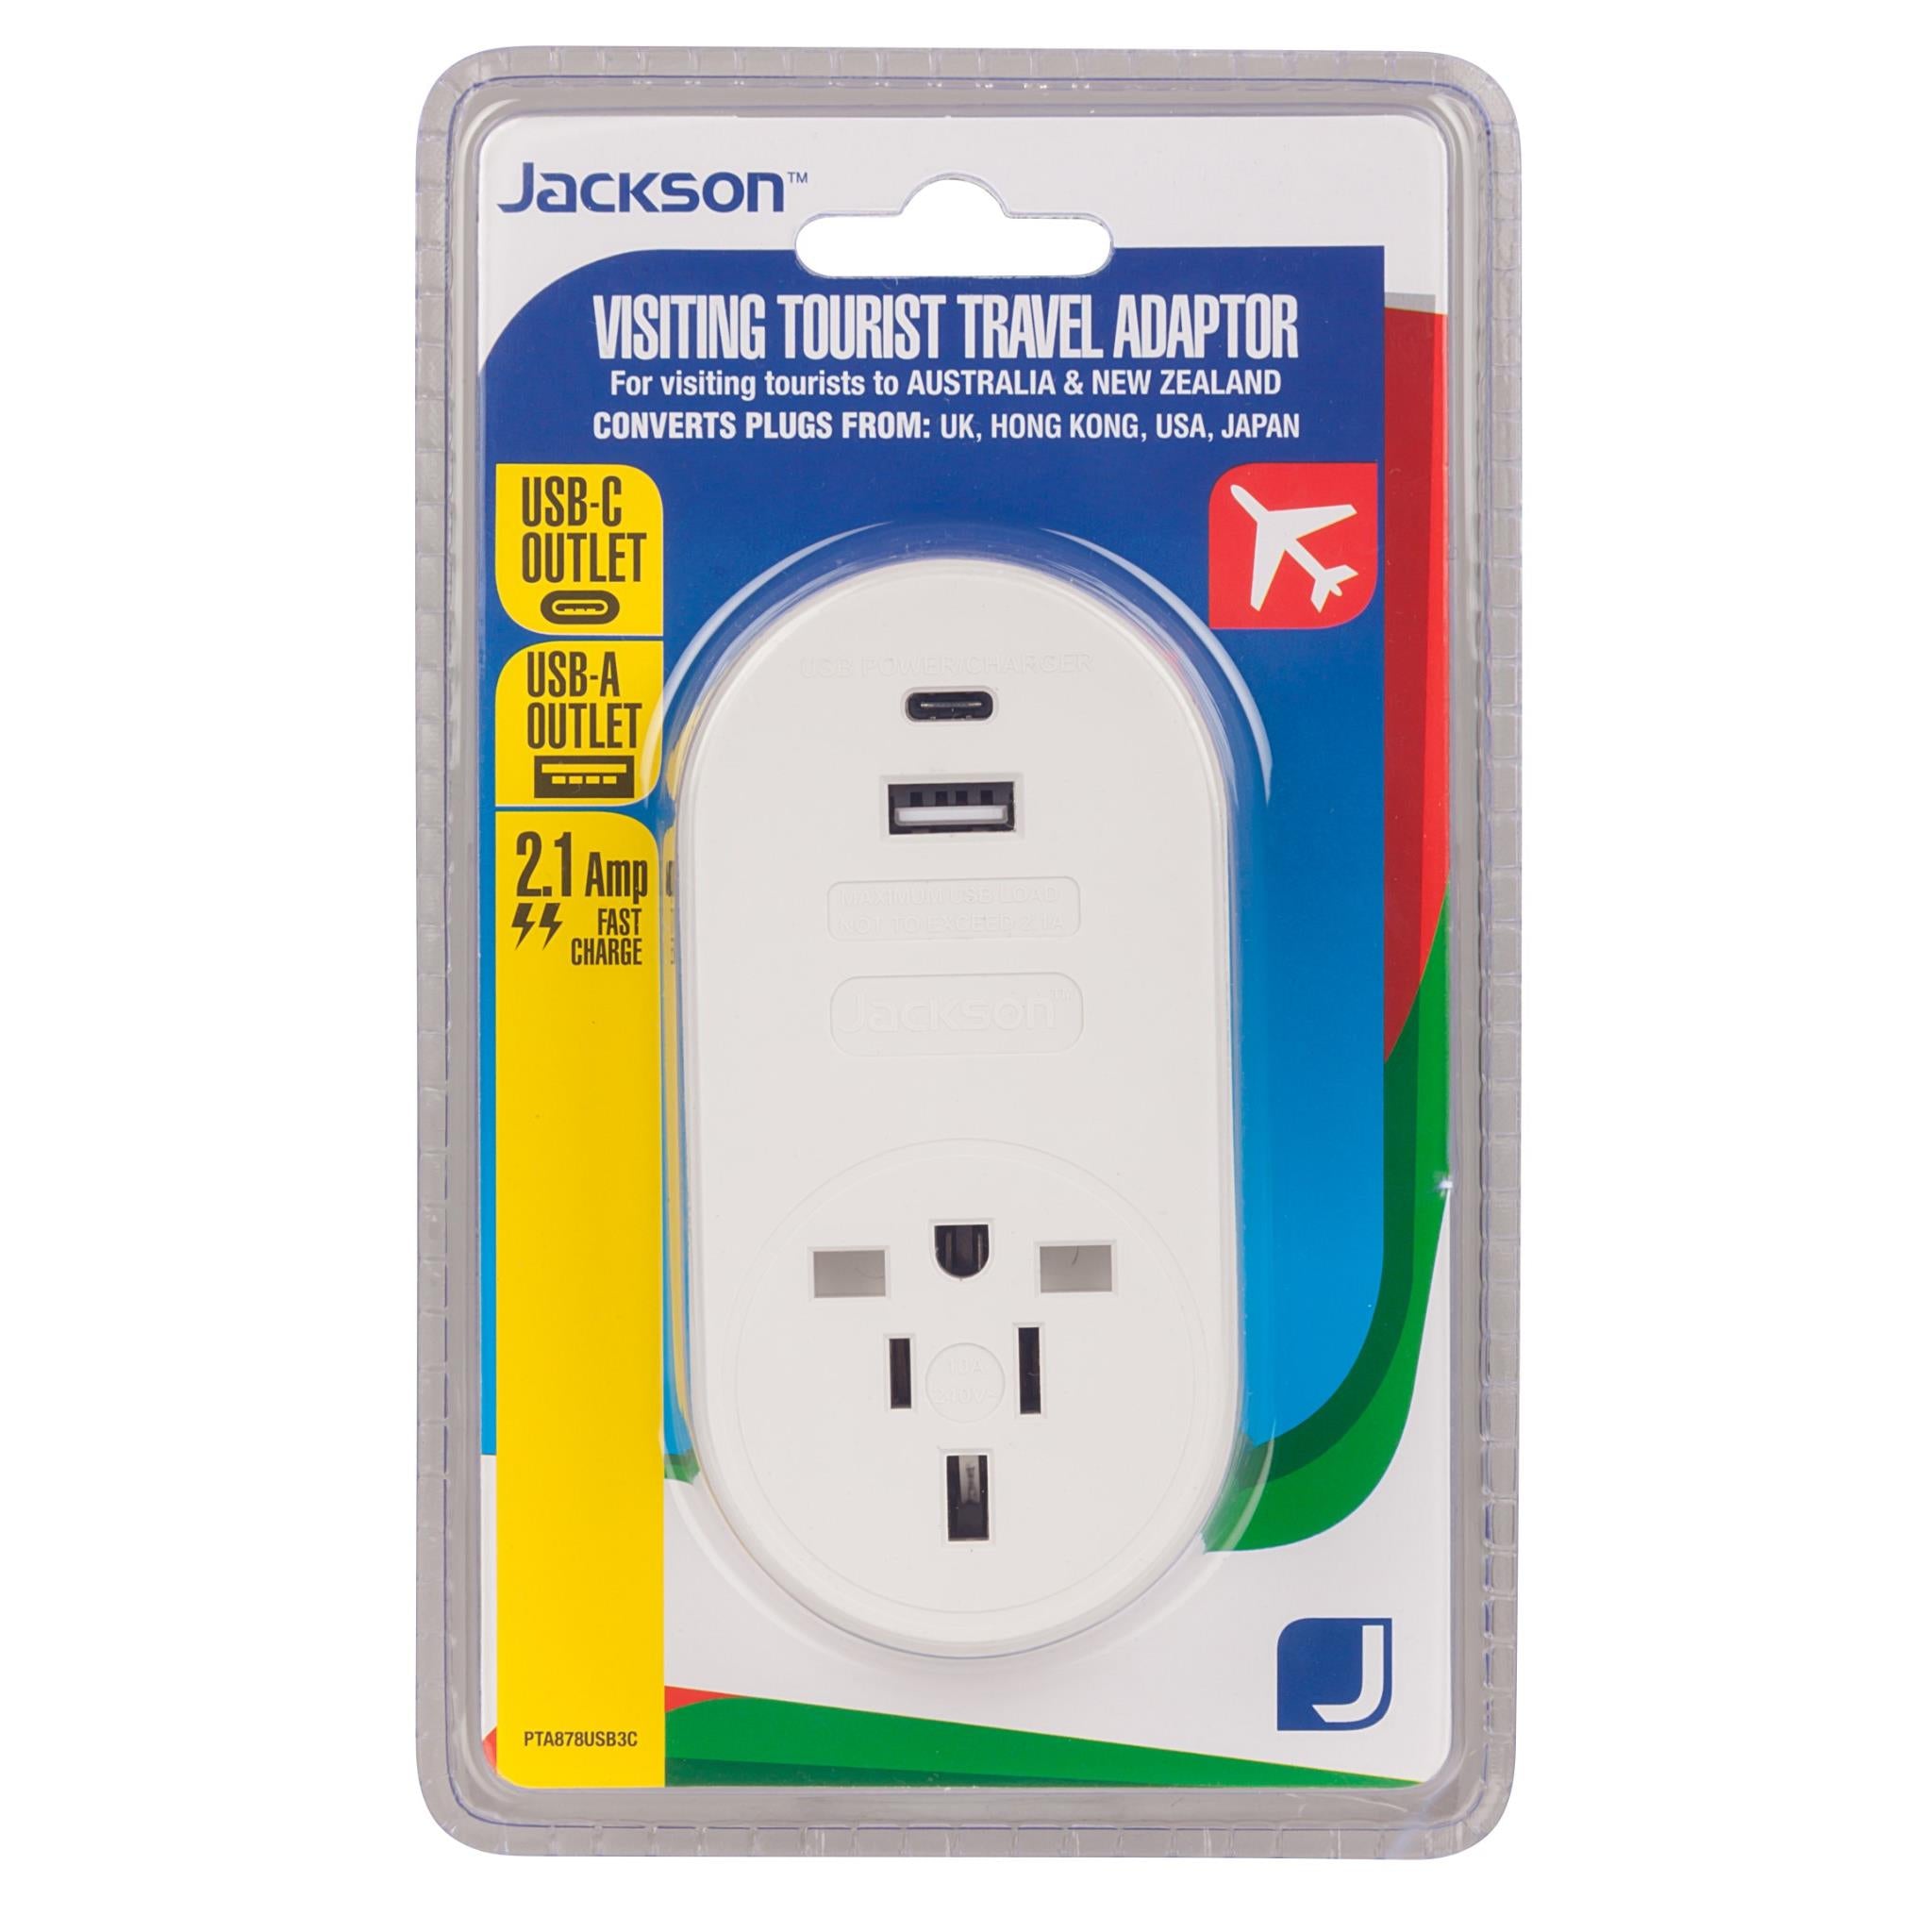 jackson inbound travel adaptor with usb for plugs from uk, hong kong, usa, japan and more